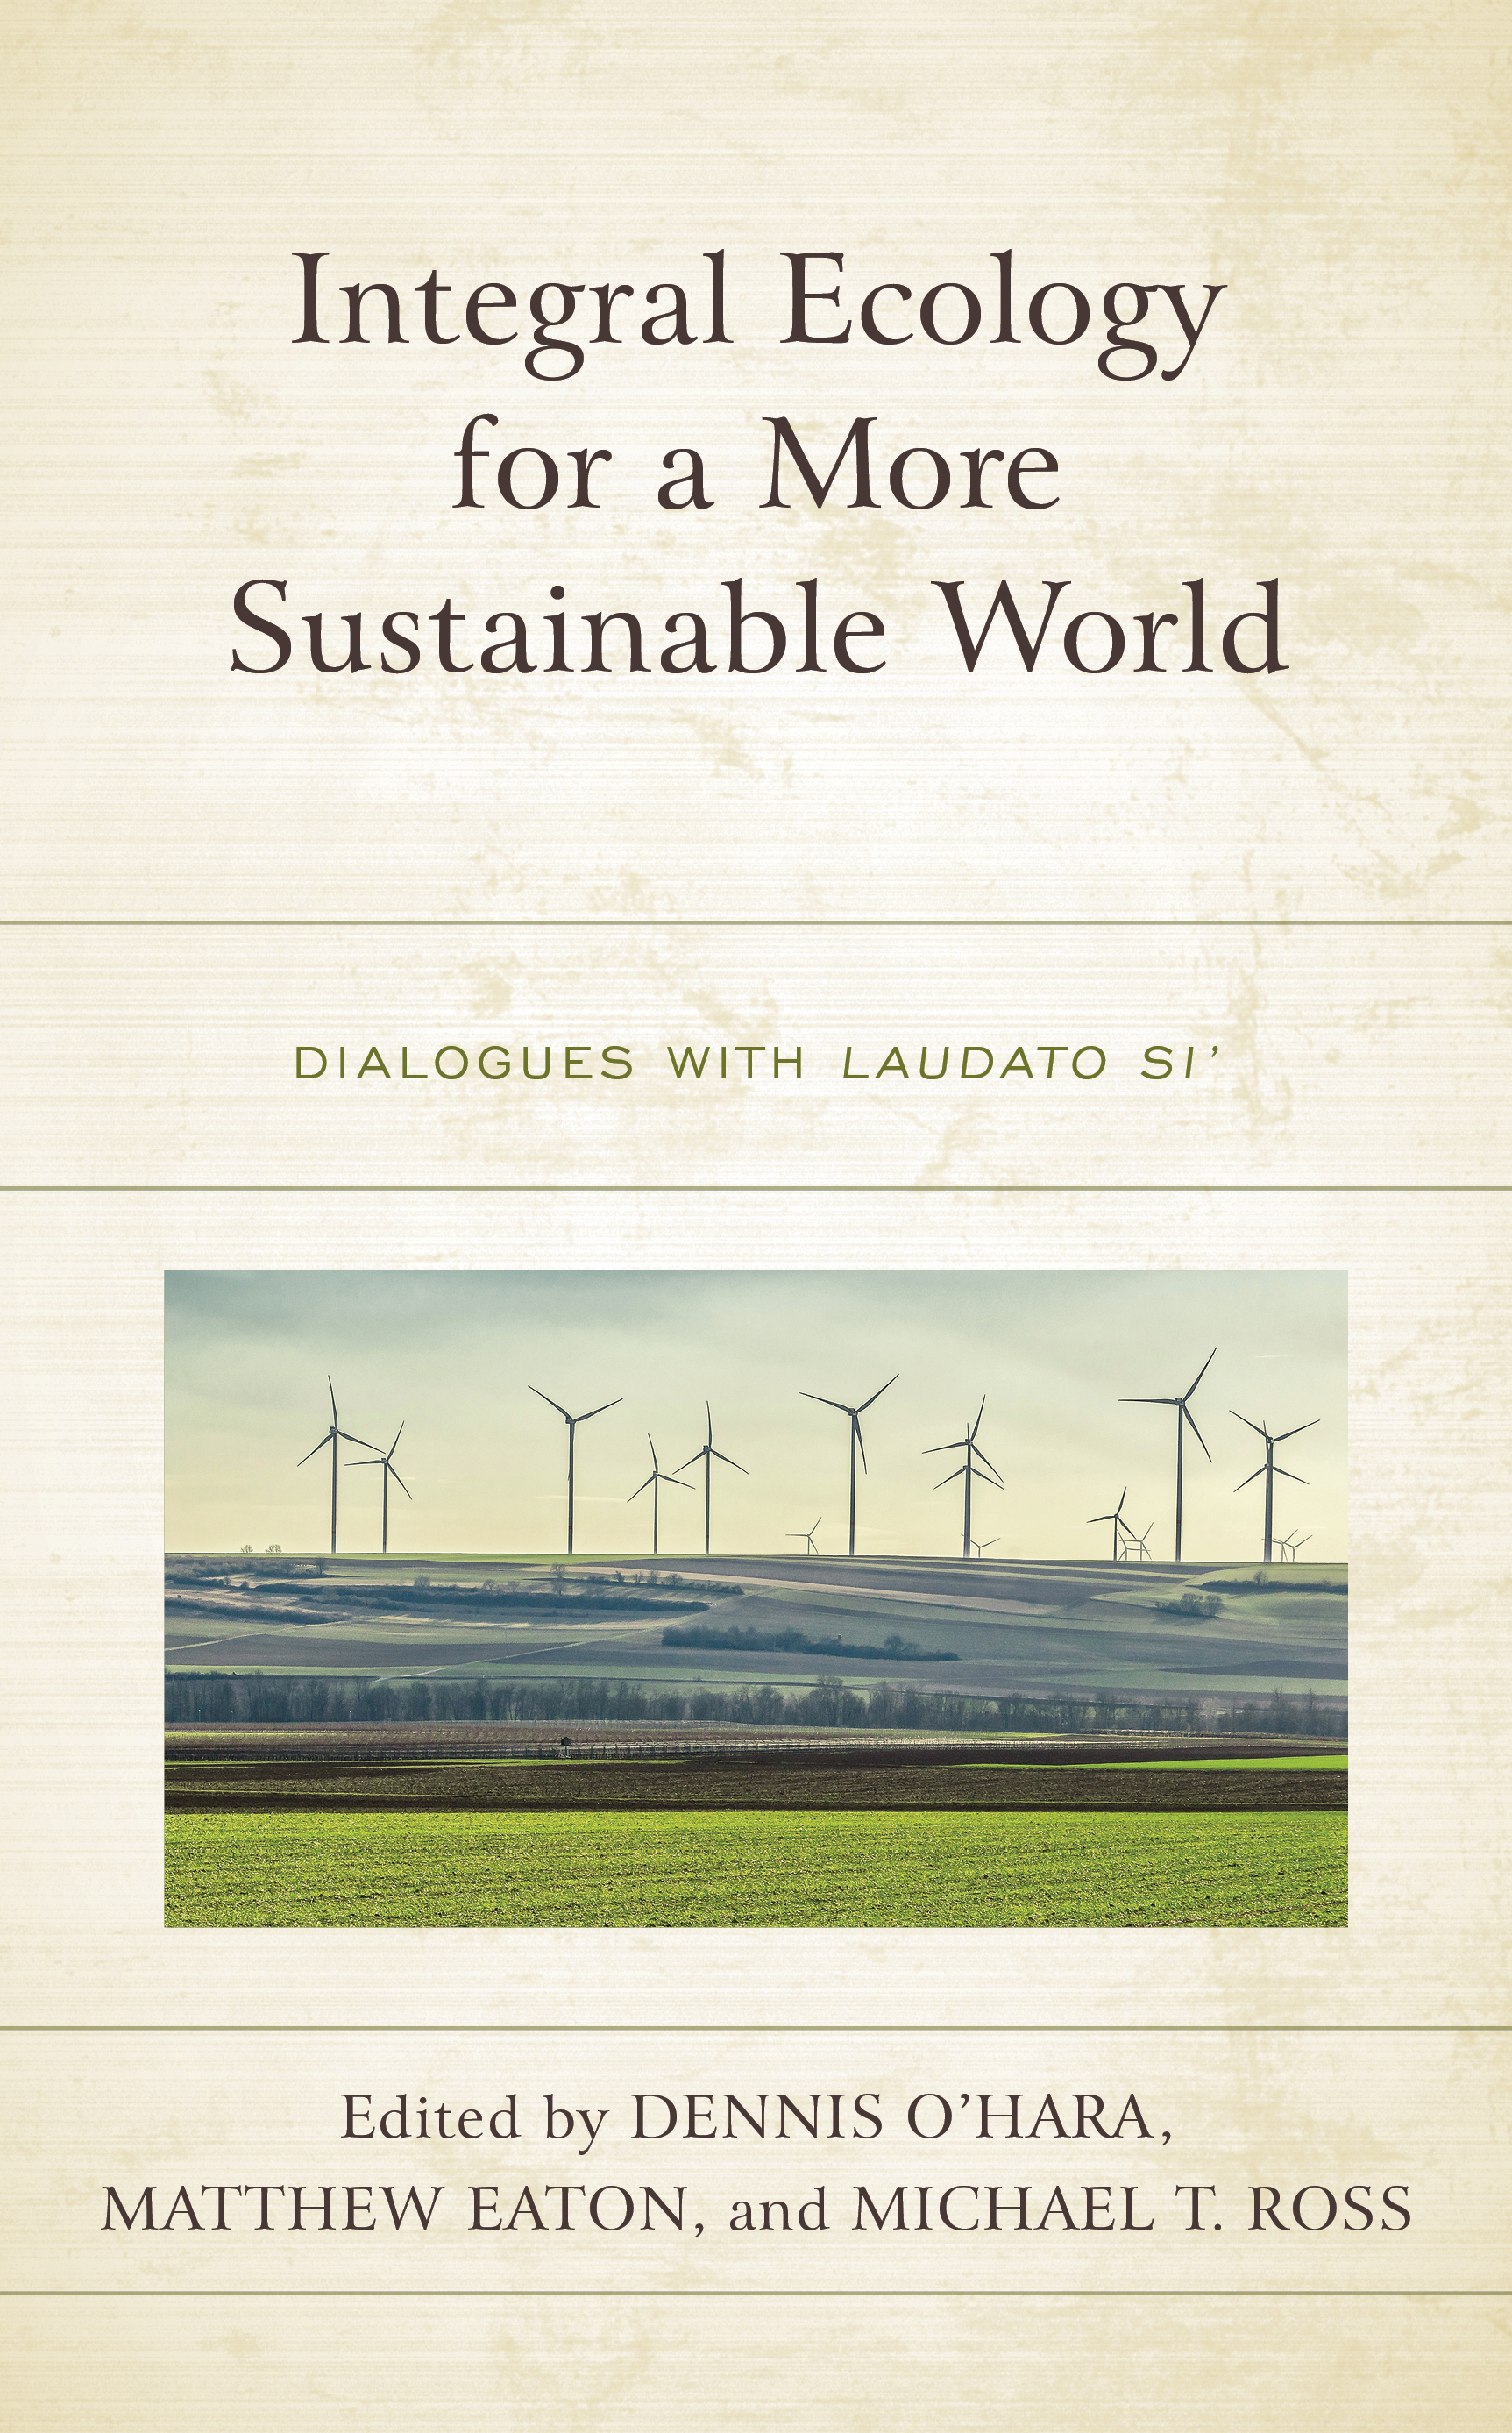 Integral Ecology for a More Sustainable World: Dialogues with Laudato Si'